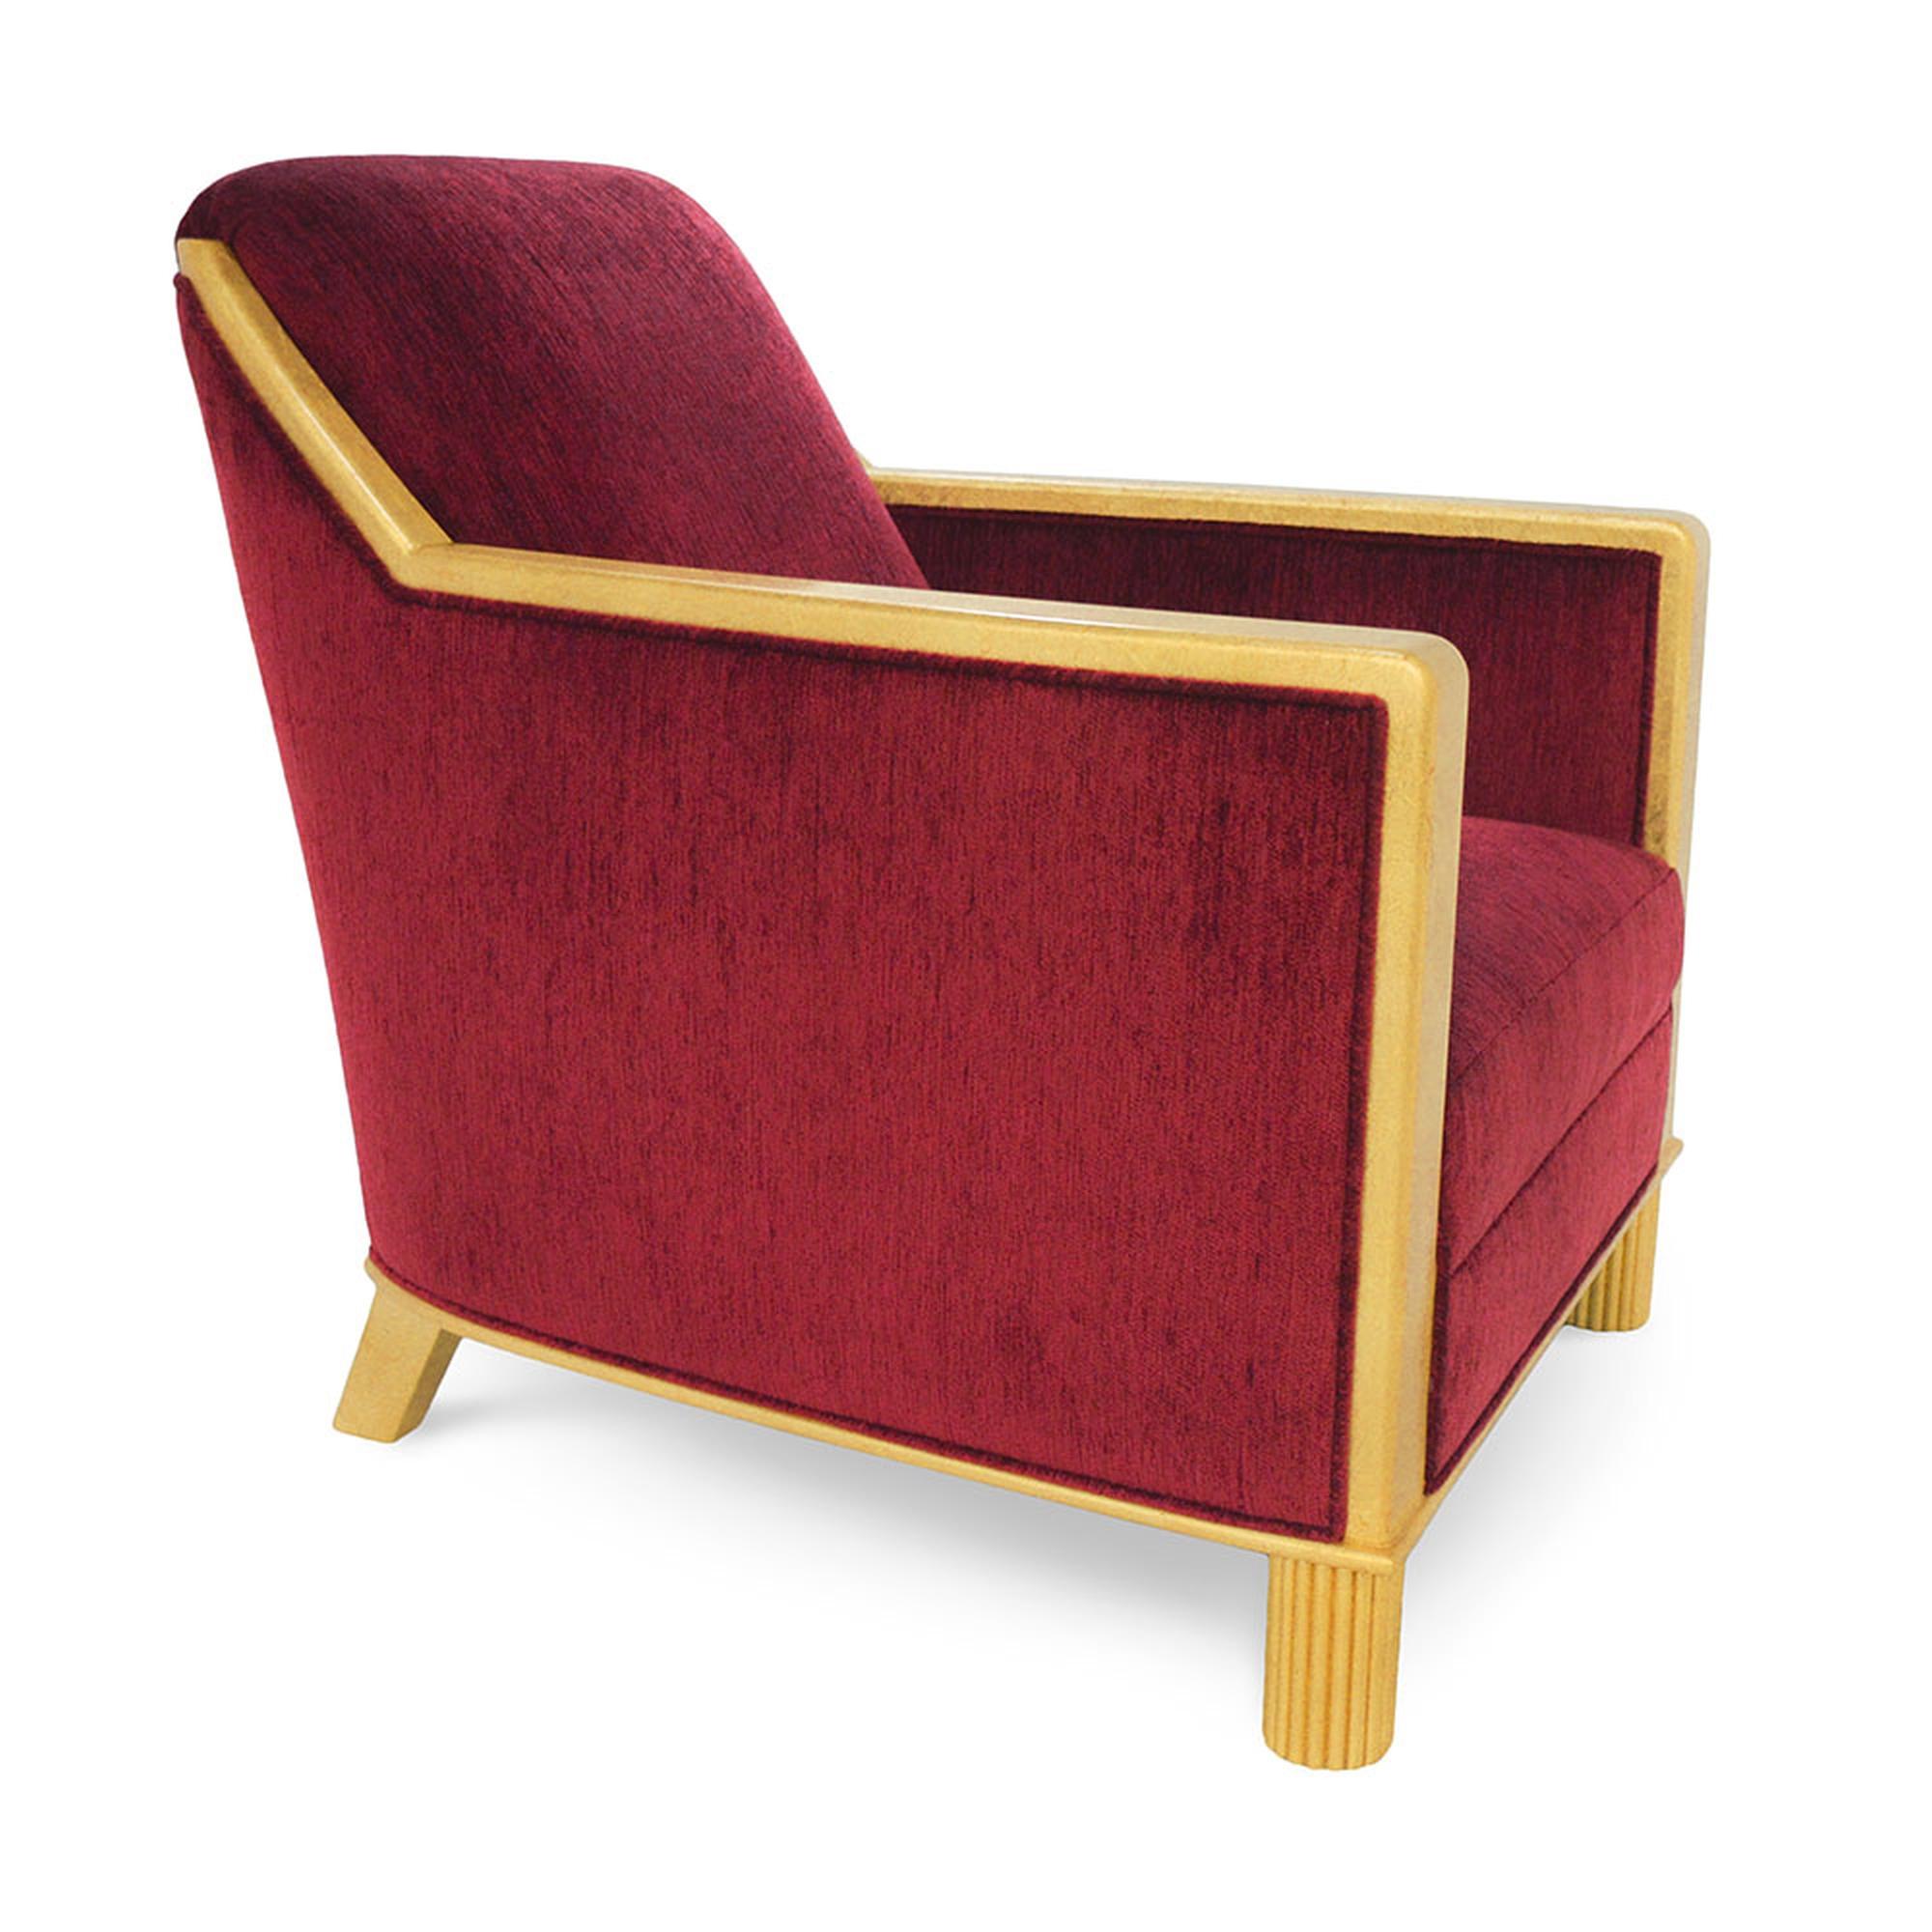 The Marmont lounge chair is a classic piece with a modern appeal as it gives a nod to old Hollywood glamour, while maintaining its sleek forward design. Upholstered on all sides and accented with hand-gilded matte wood that ows beautifully from end